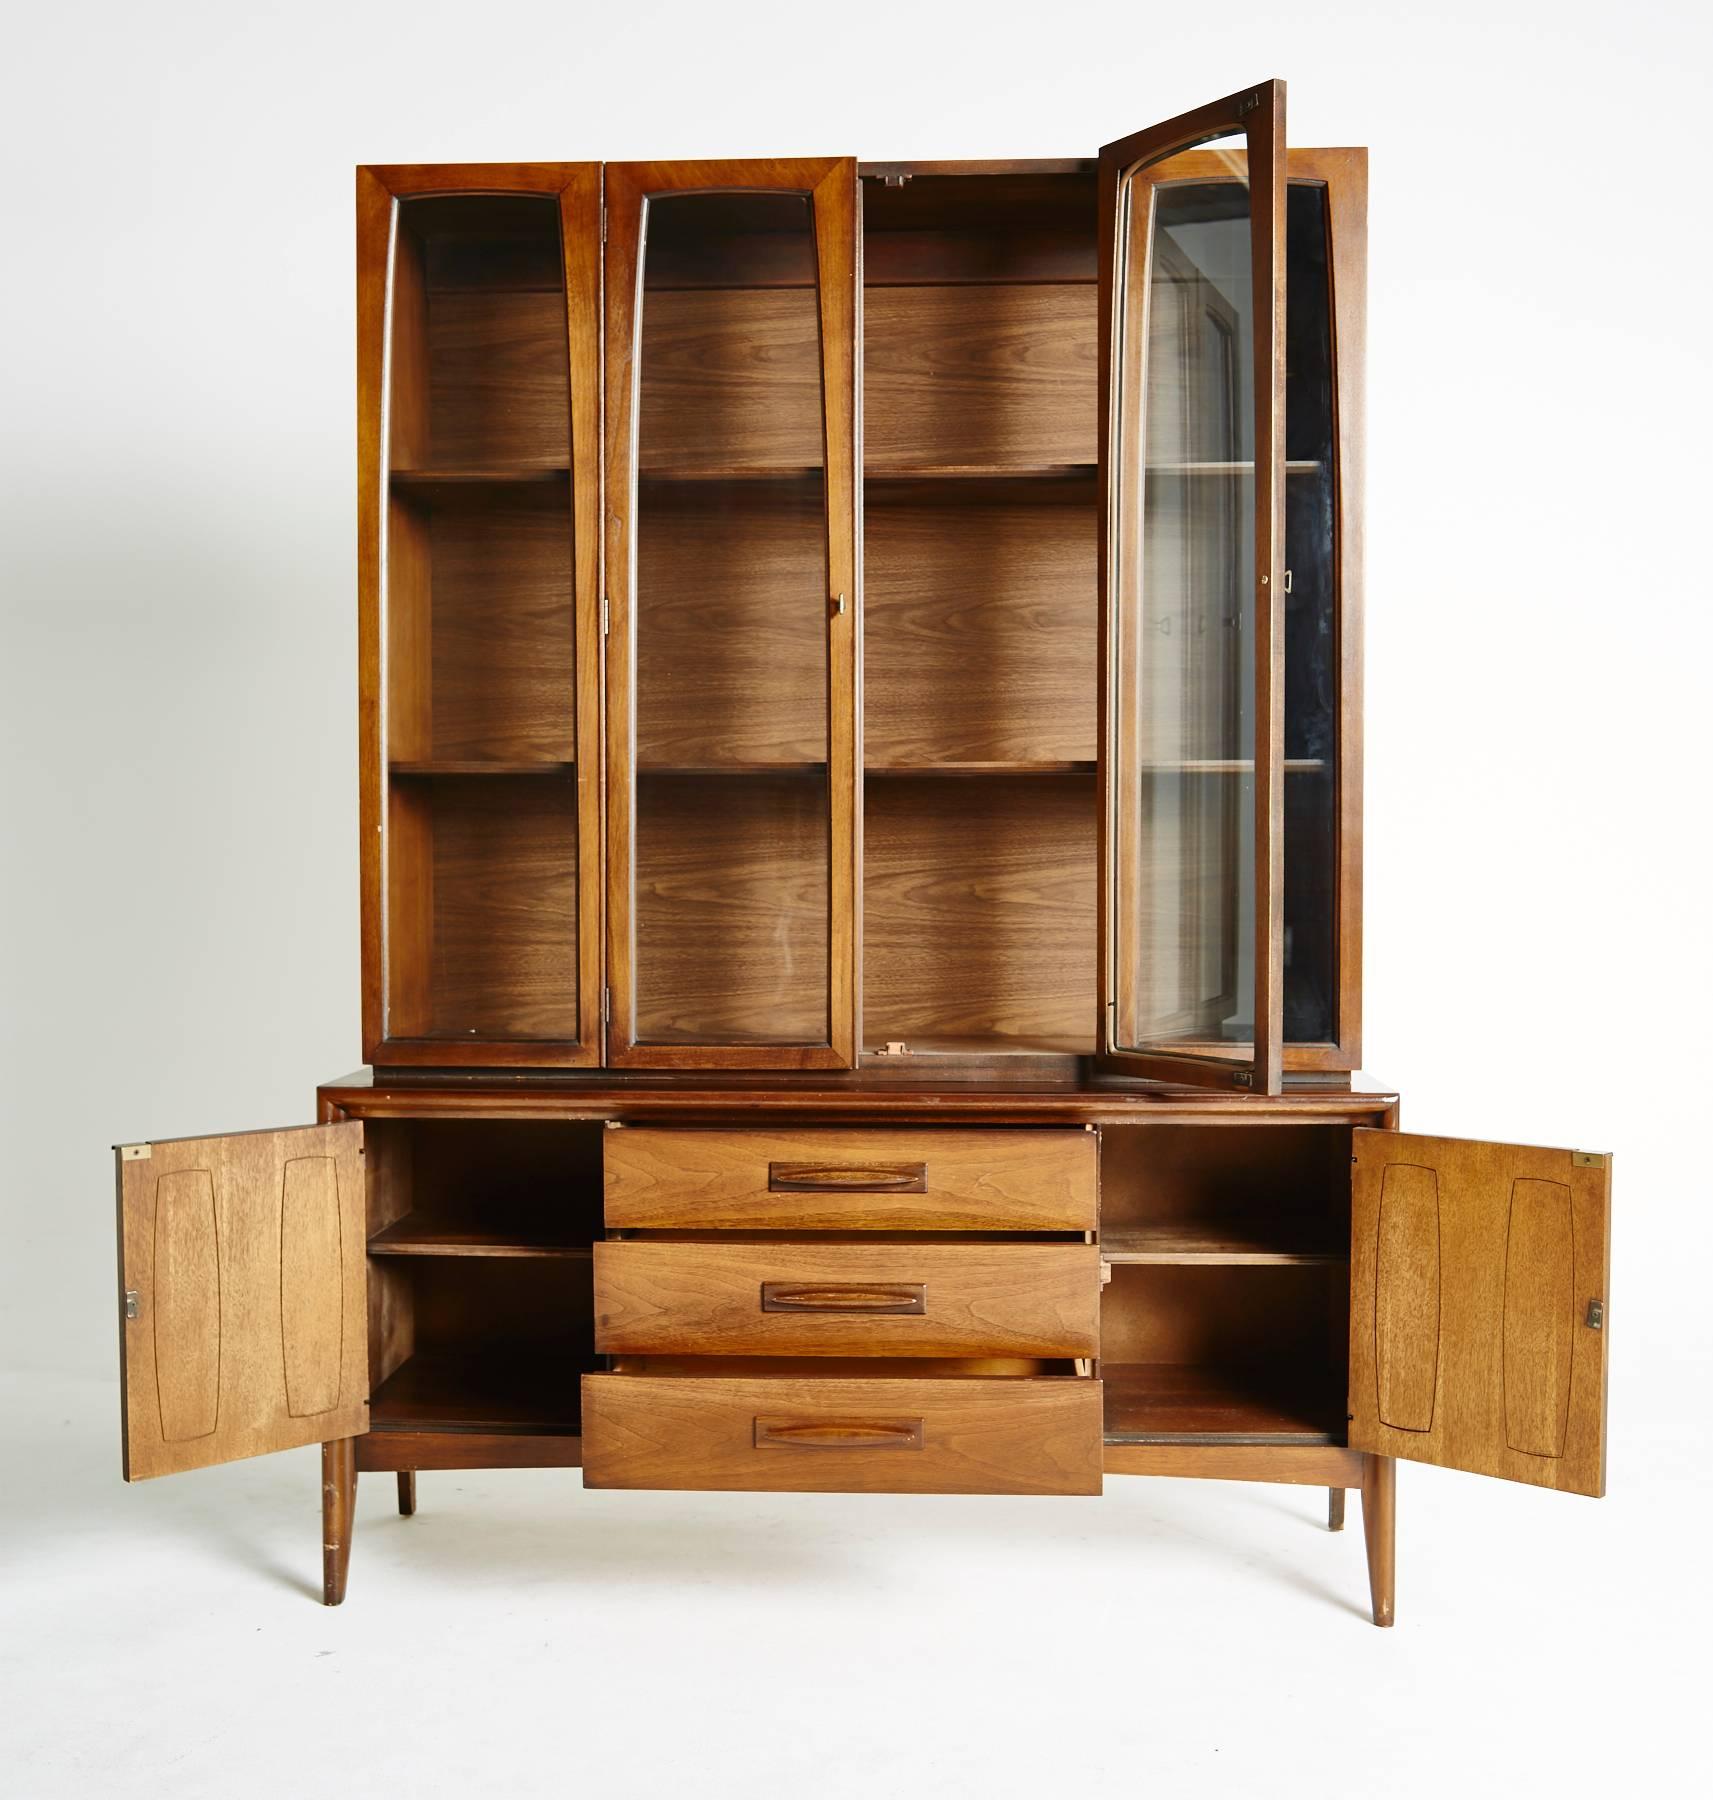 This large American modern hutch unit has beautiful Midcentury details adorning its exterior and ample storage inside. The top china cabinet has four windows that are tapered at the top and the bottom, two of which are doors that open into the